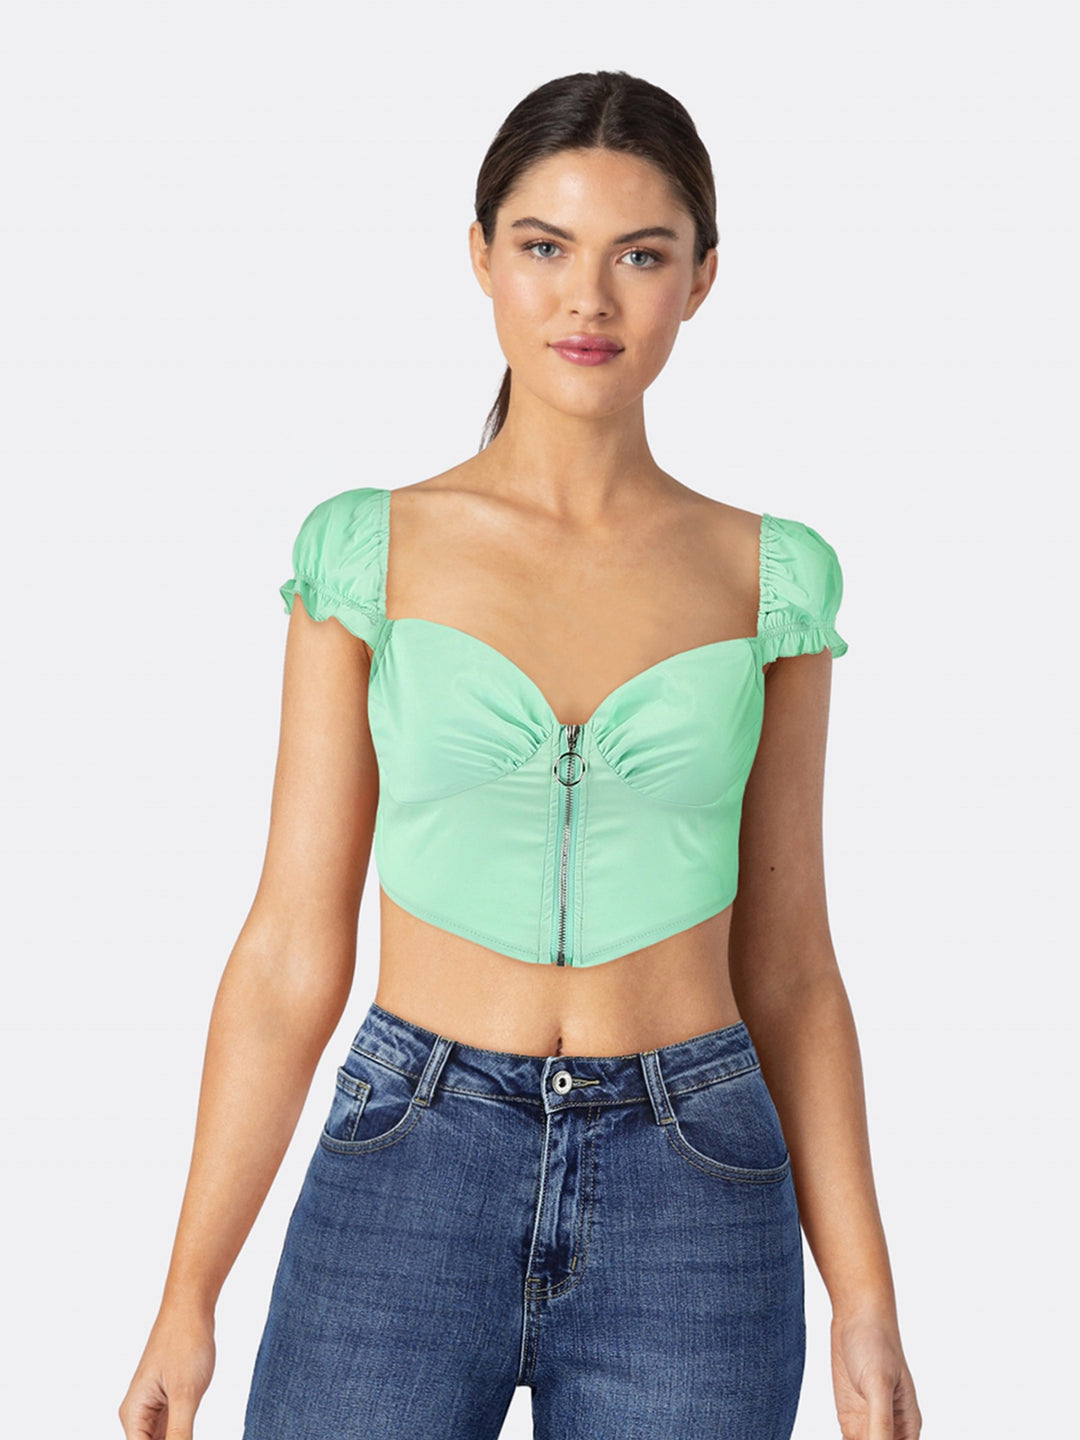 Low-cut Front Zipper Puff Sleeve Crop Top with V-neck Mint Front Close